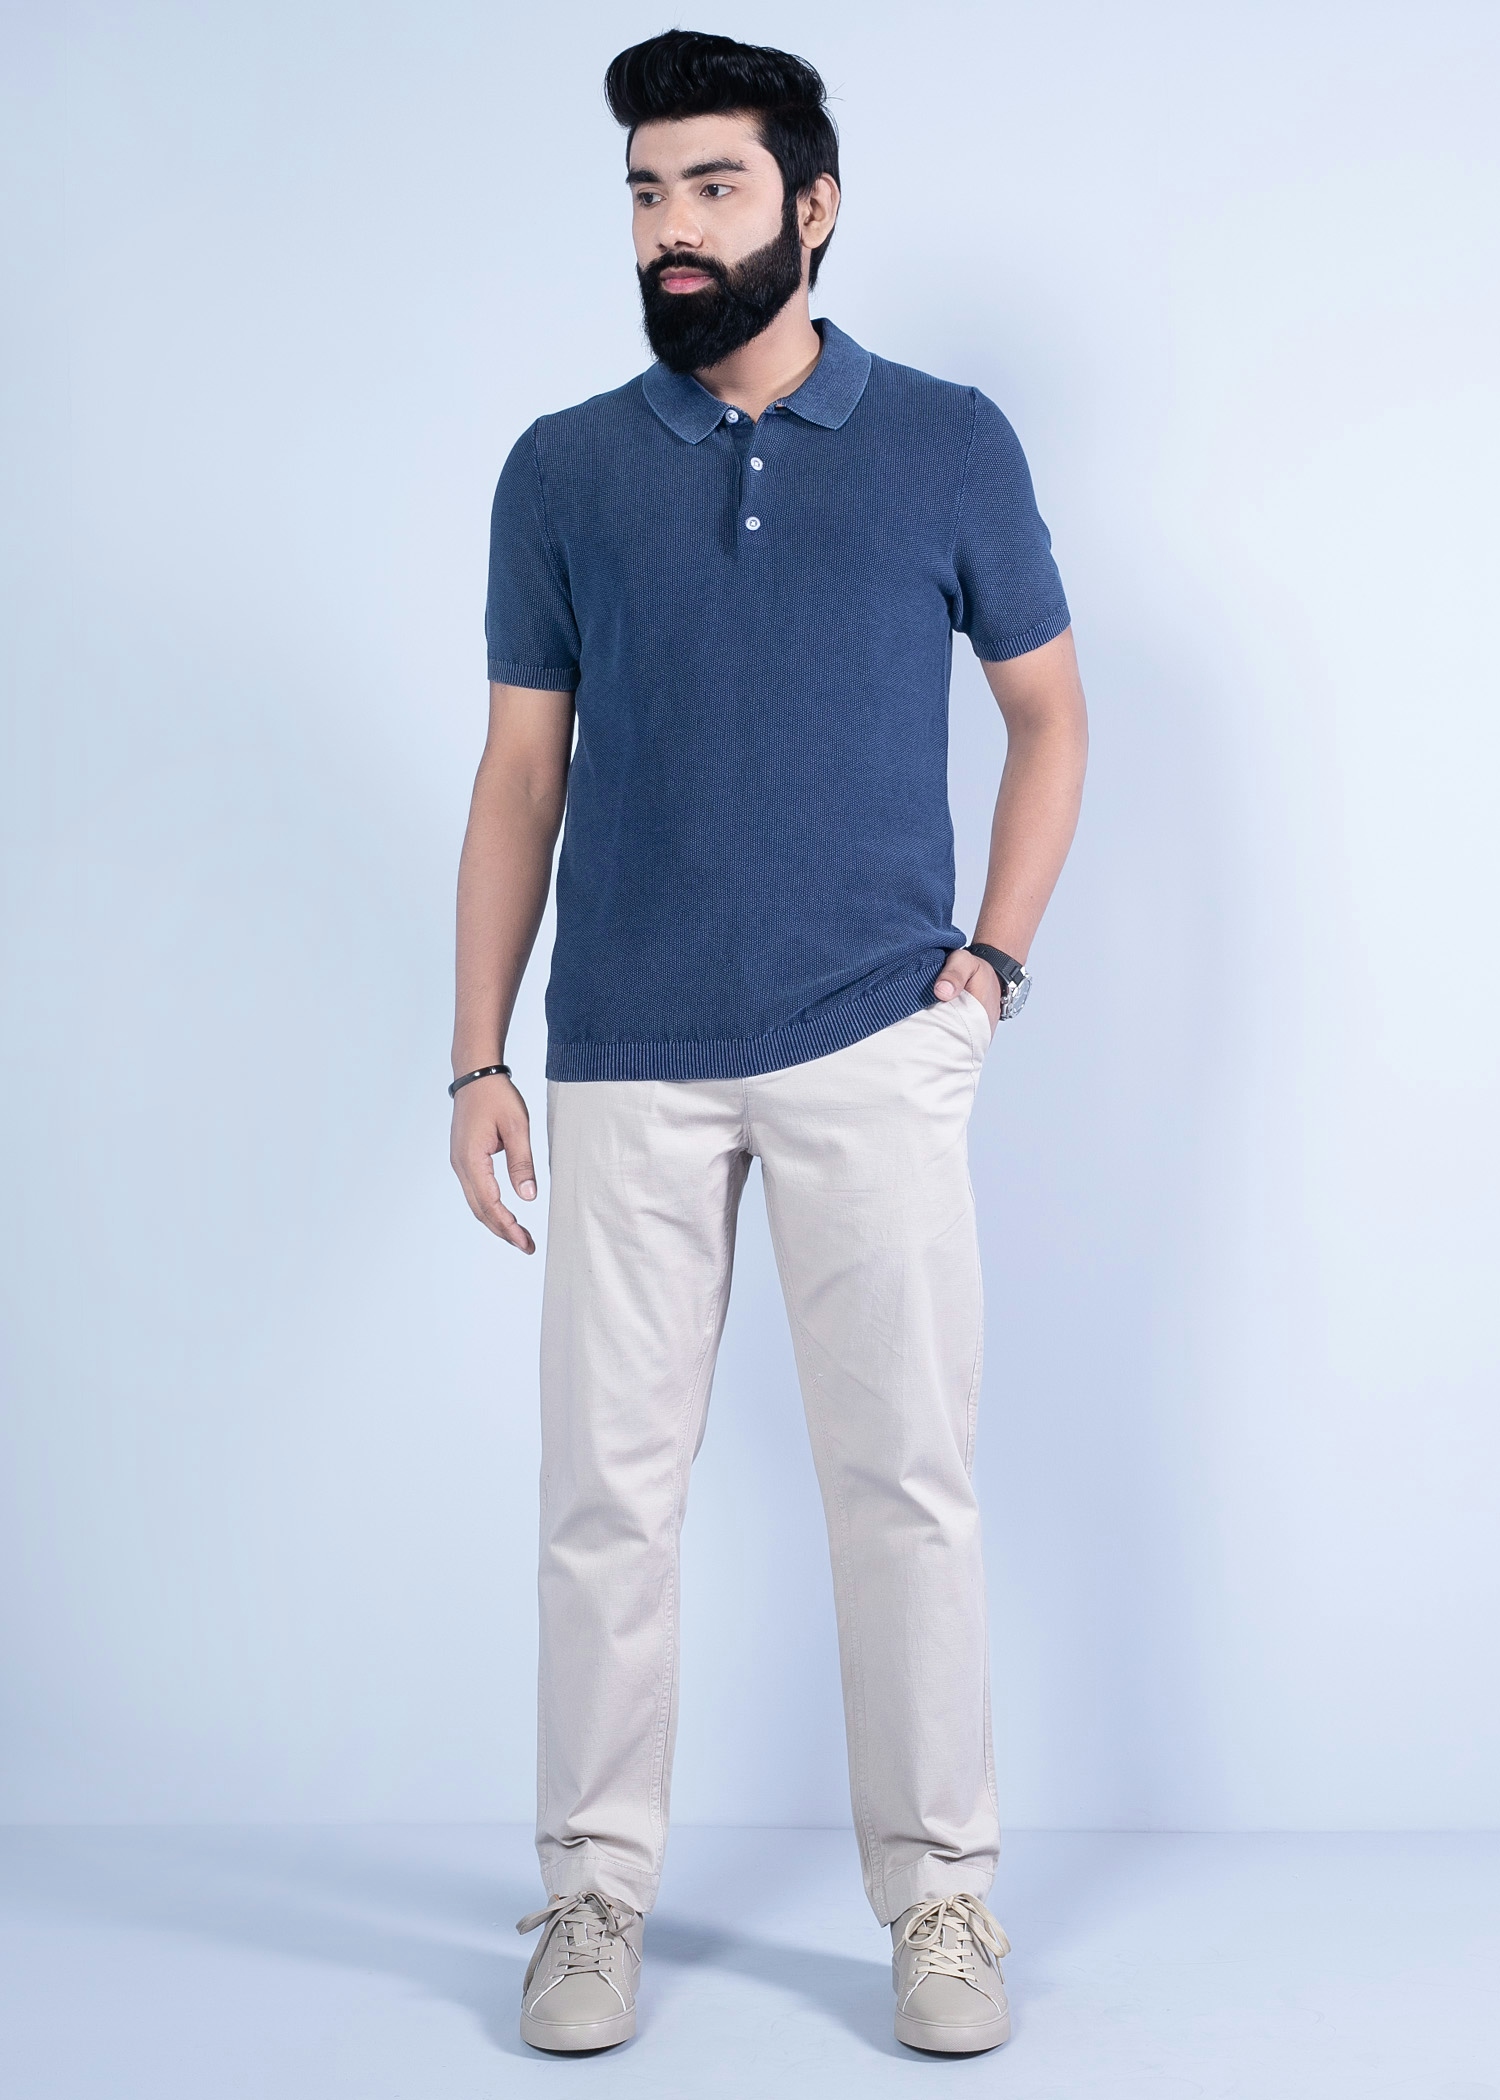 tanta polo navy color full front view